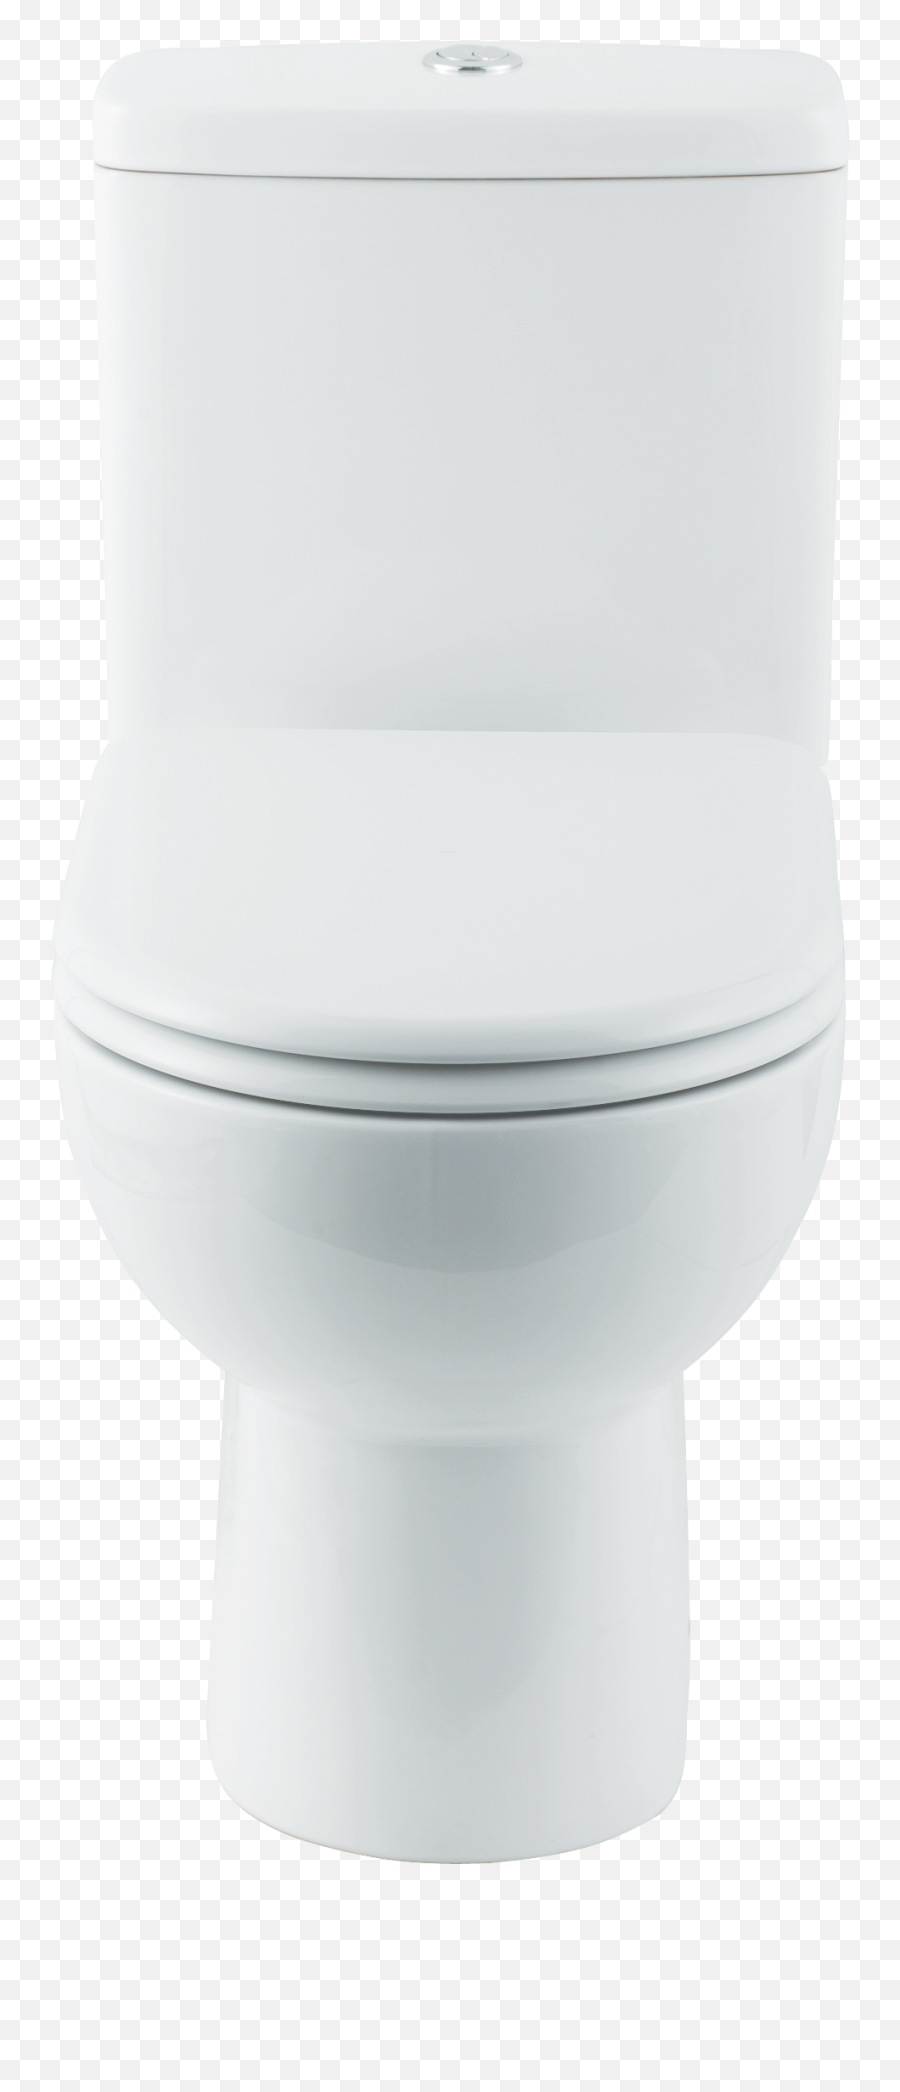 Toilet Png Image - Chair,Bathroom Png